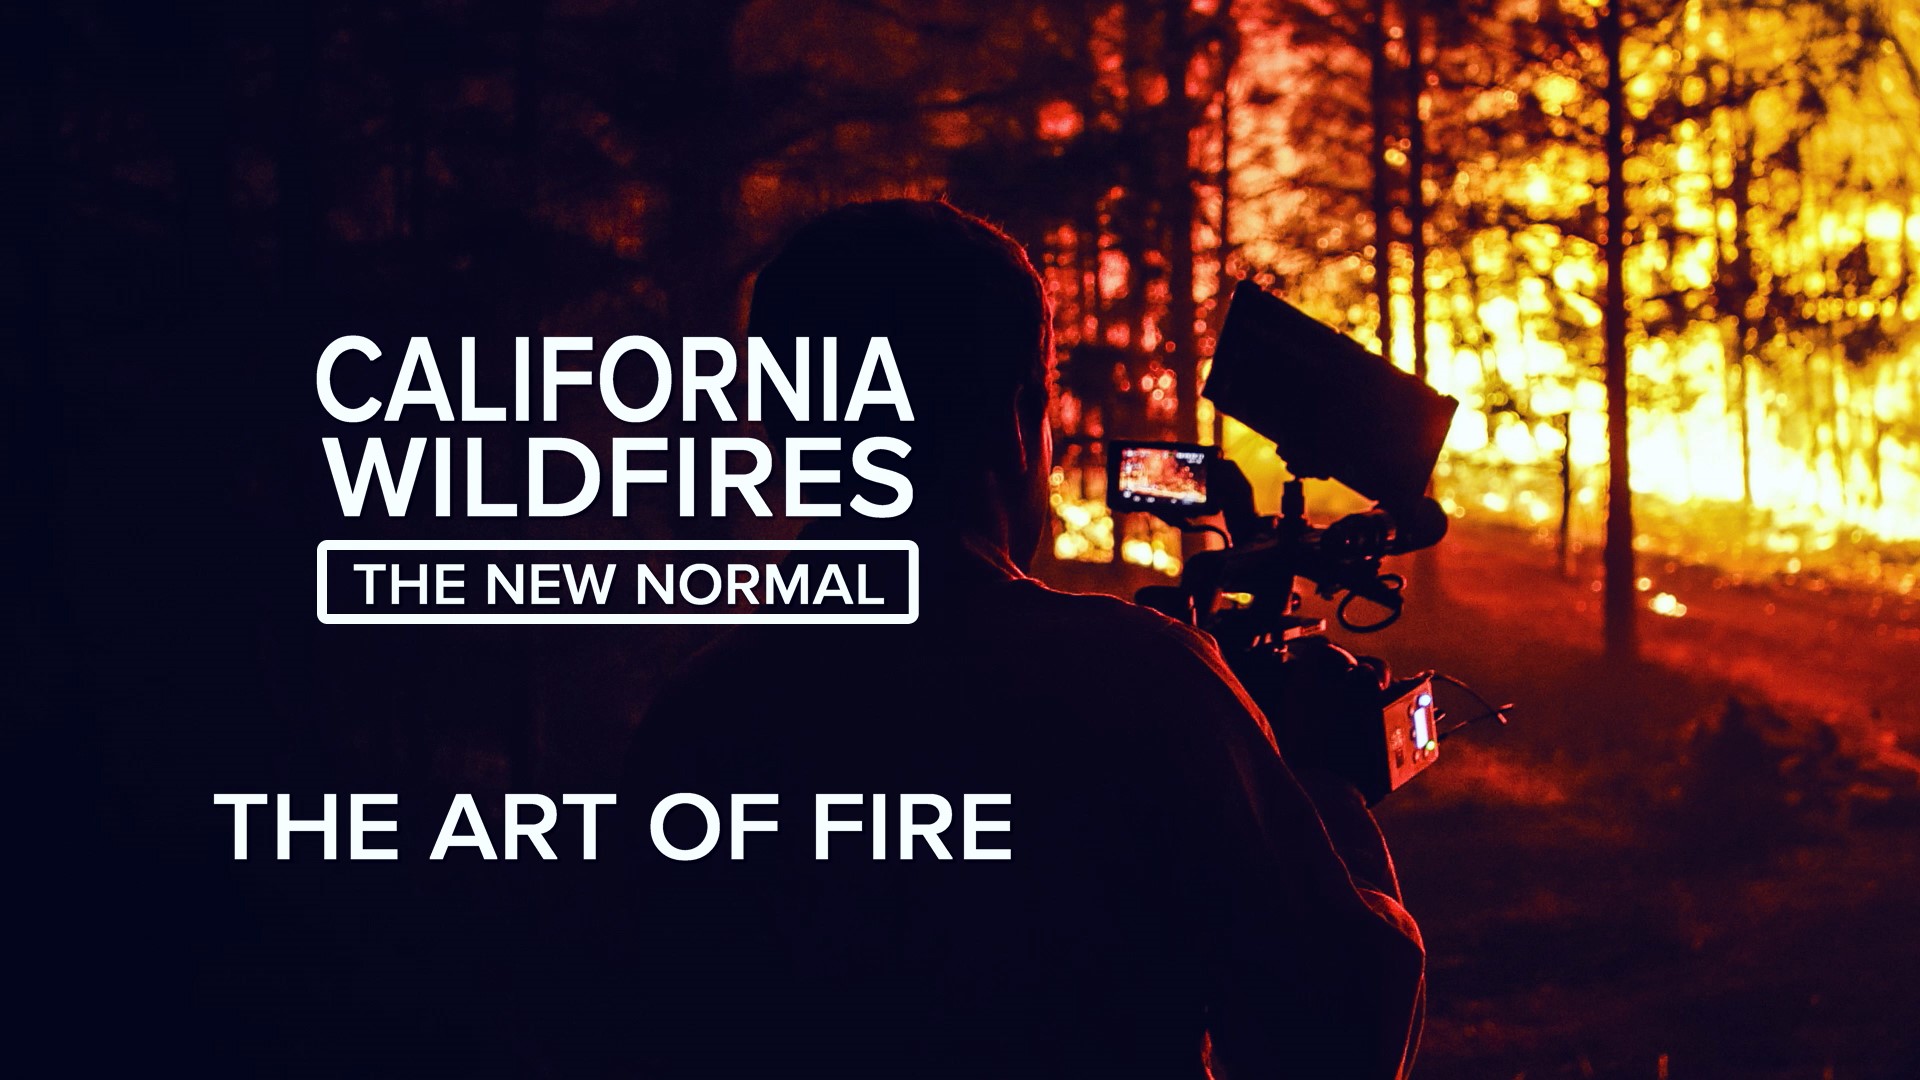 Jeff Frost is a time-lapse, wildfire photographer. He documents the progression of fire with his camera and creates high speed films.